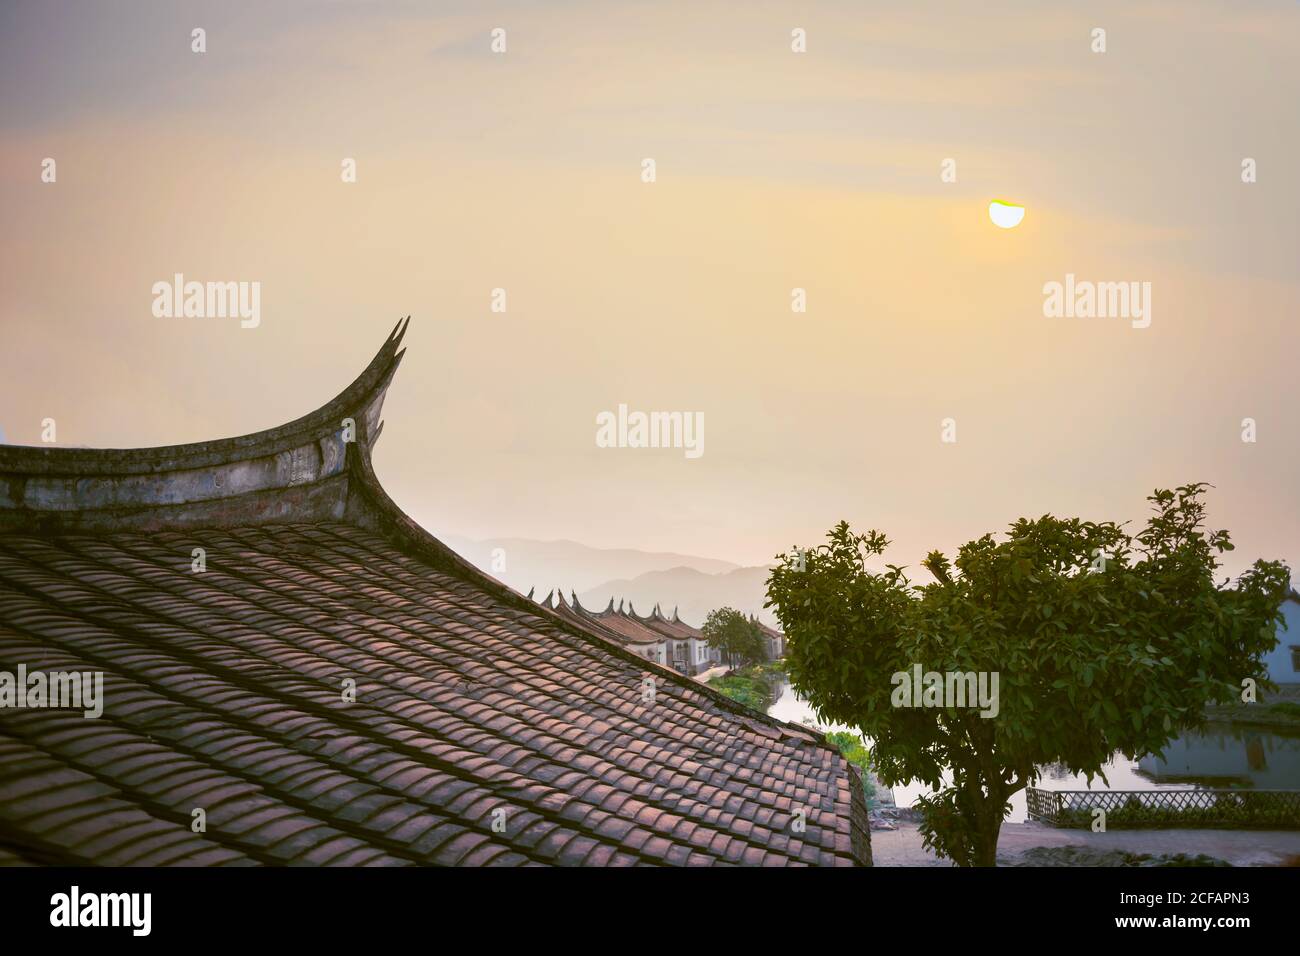 Aged stone houses with decorated roofs on background of cloudy sky in Daimei Village Stock Photo